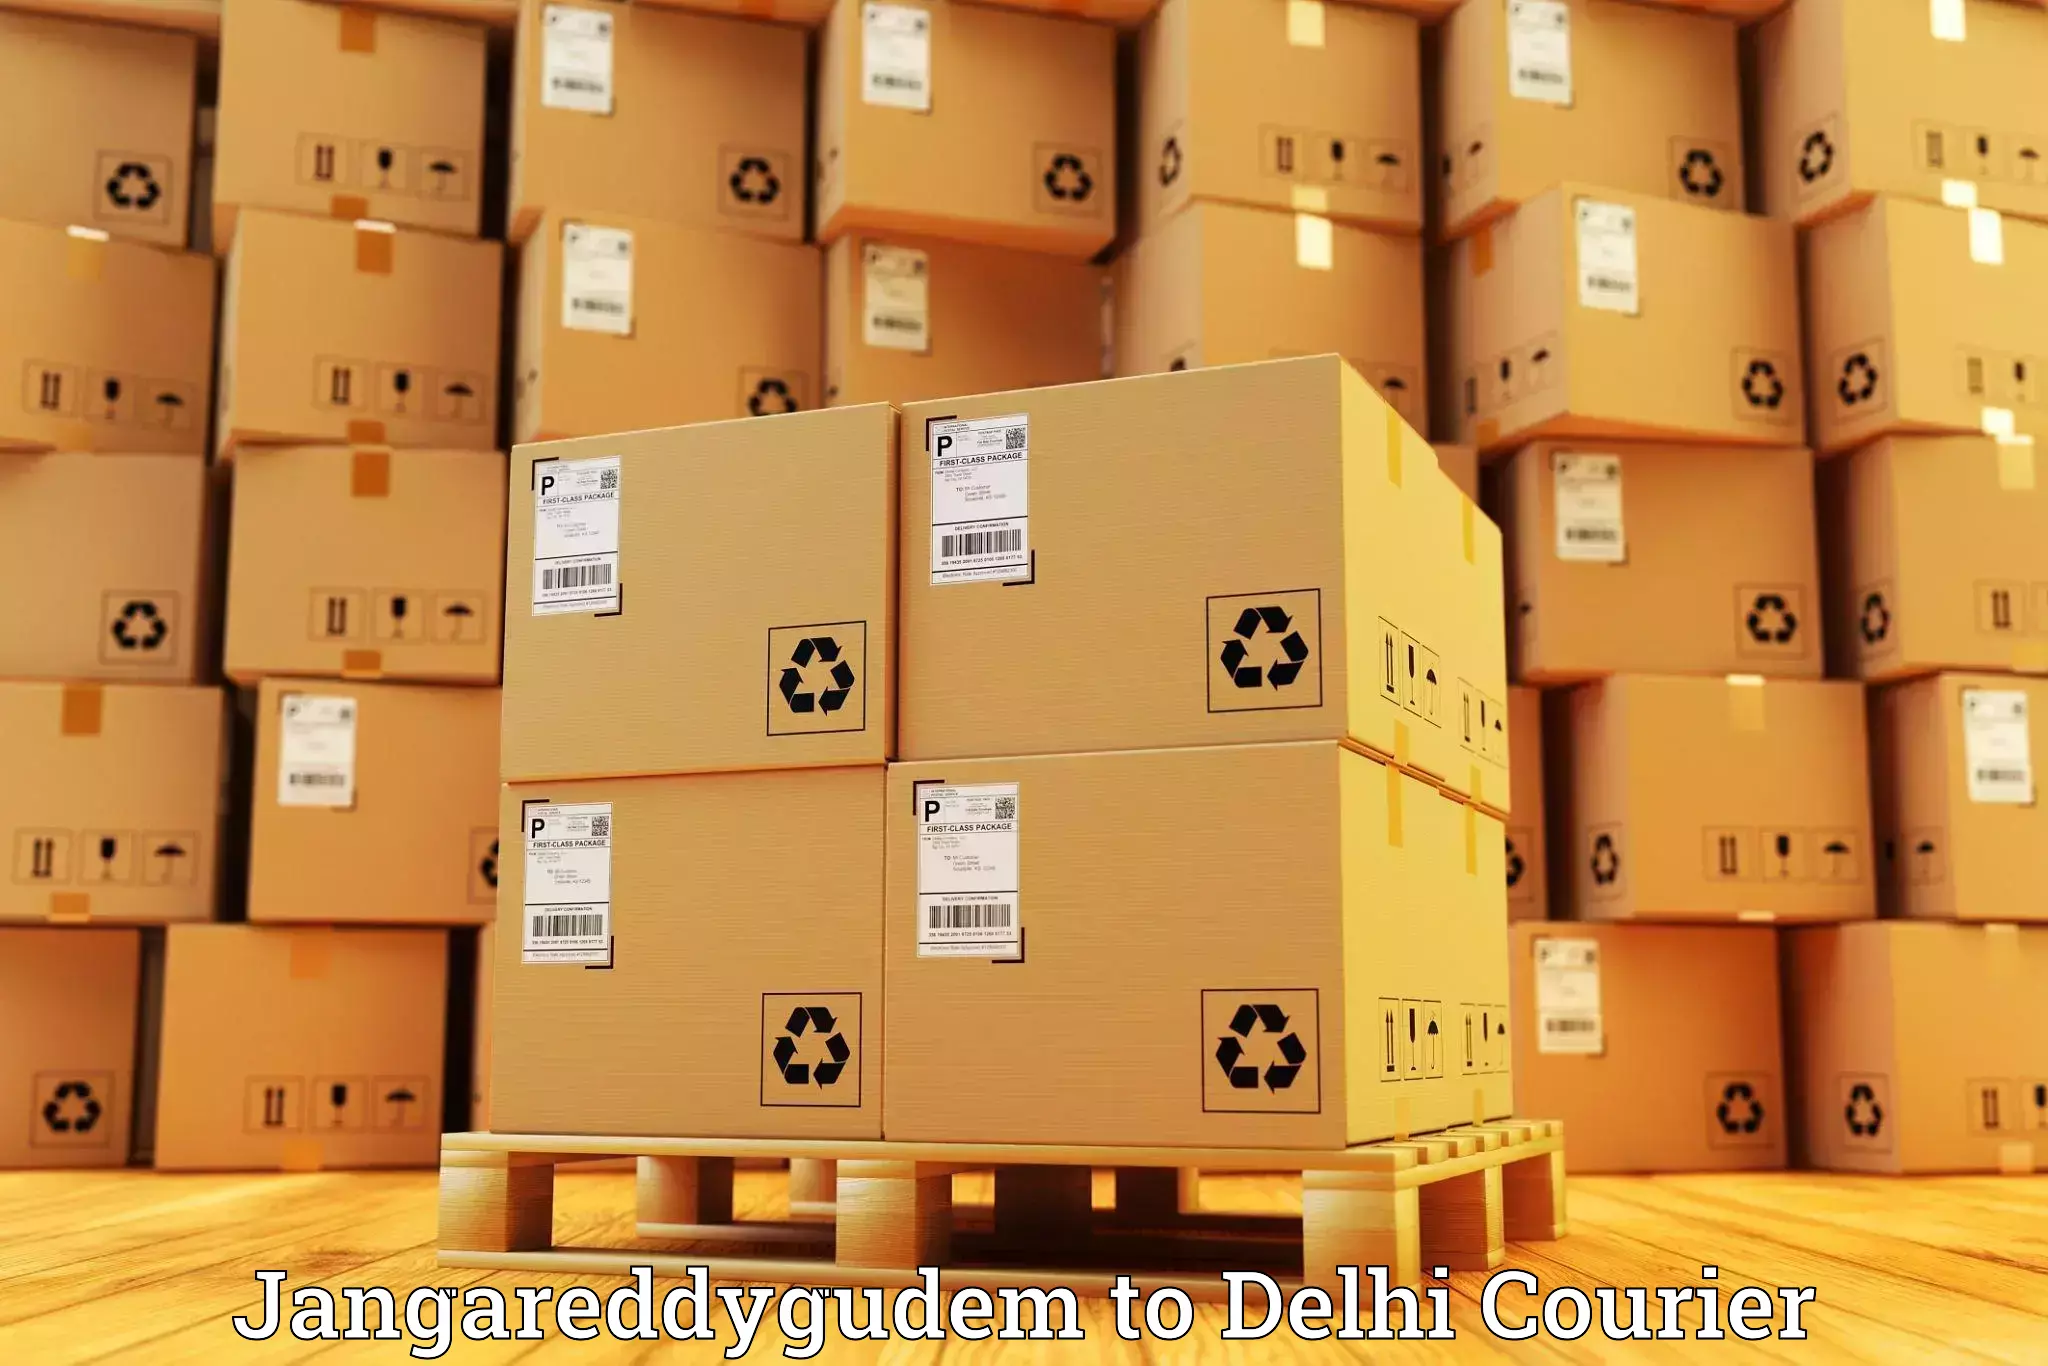 Expedited shipping solutions Jangareddygudem to NCR